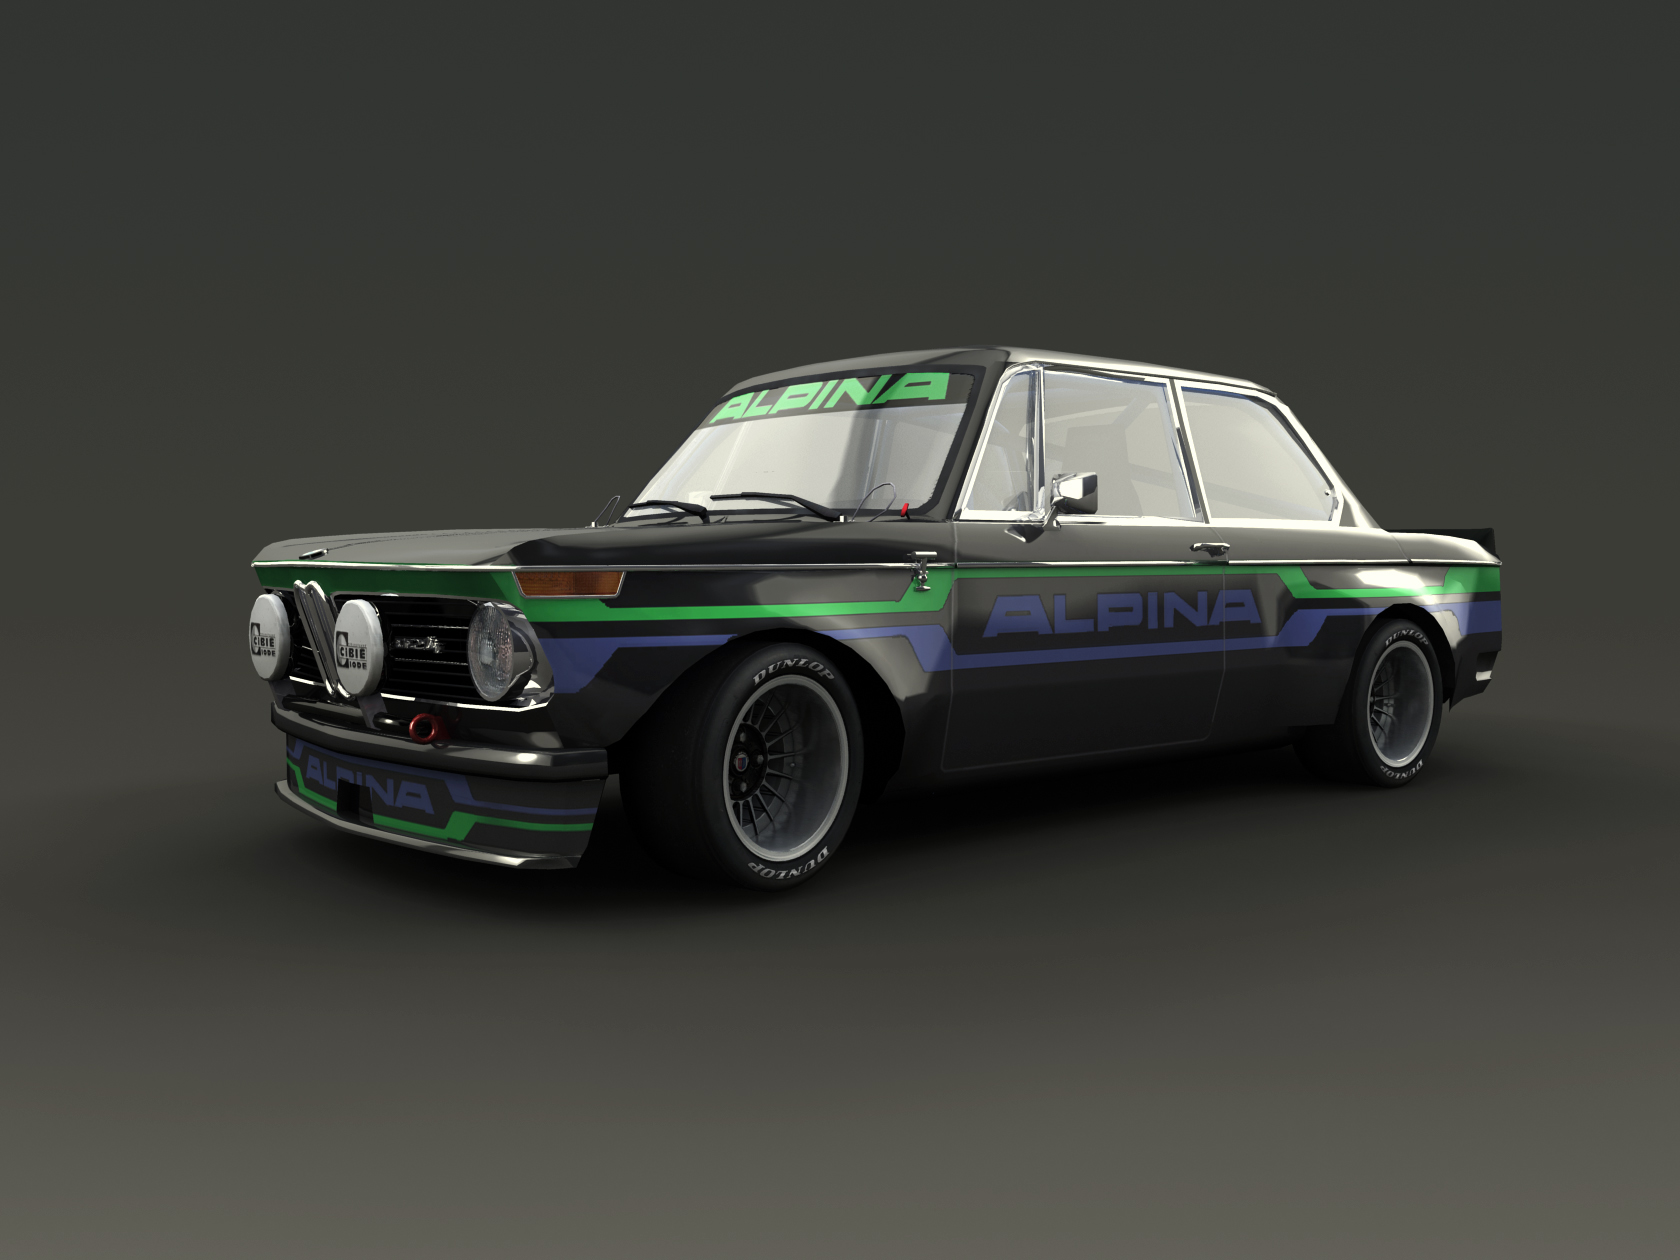 BMW 2002 Tii for GT Legends â€“ Lots of New Previews